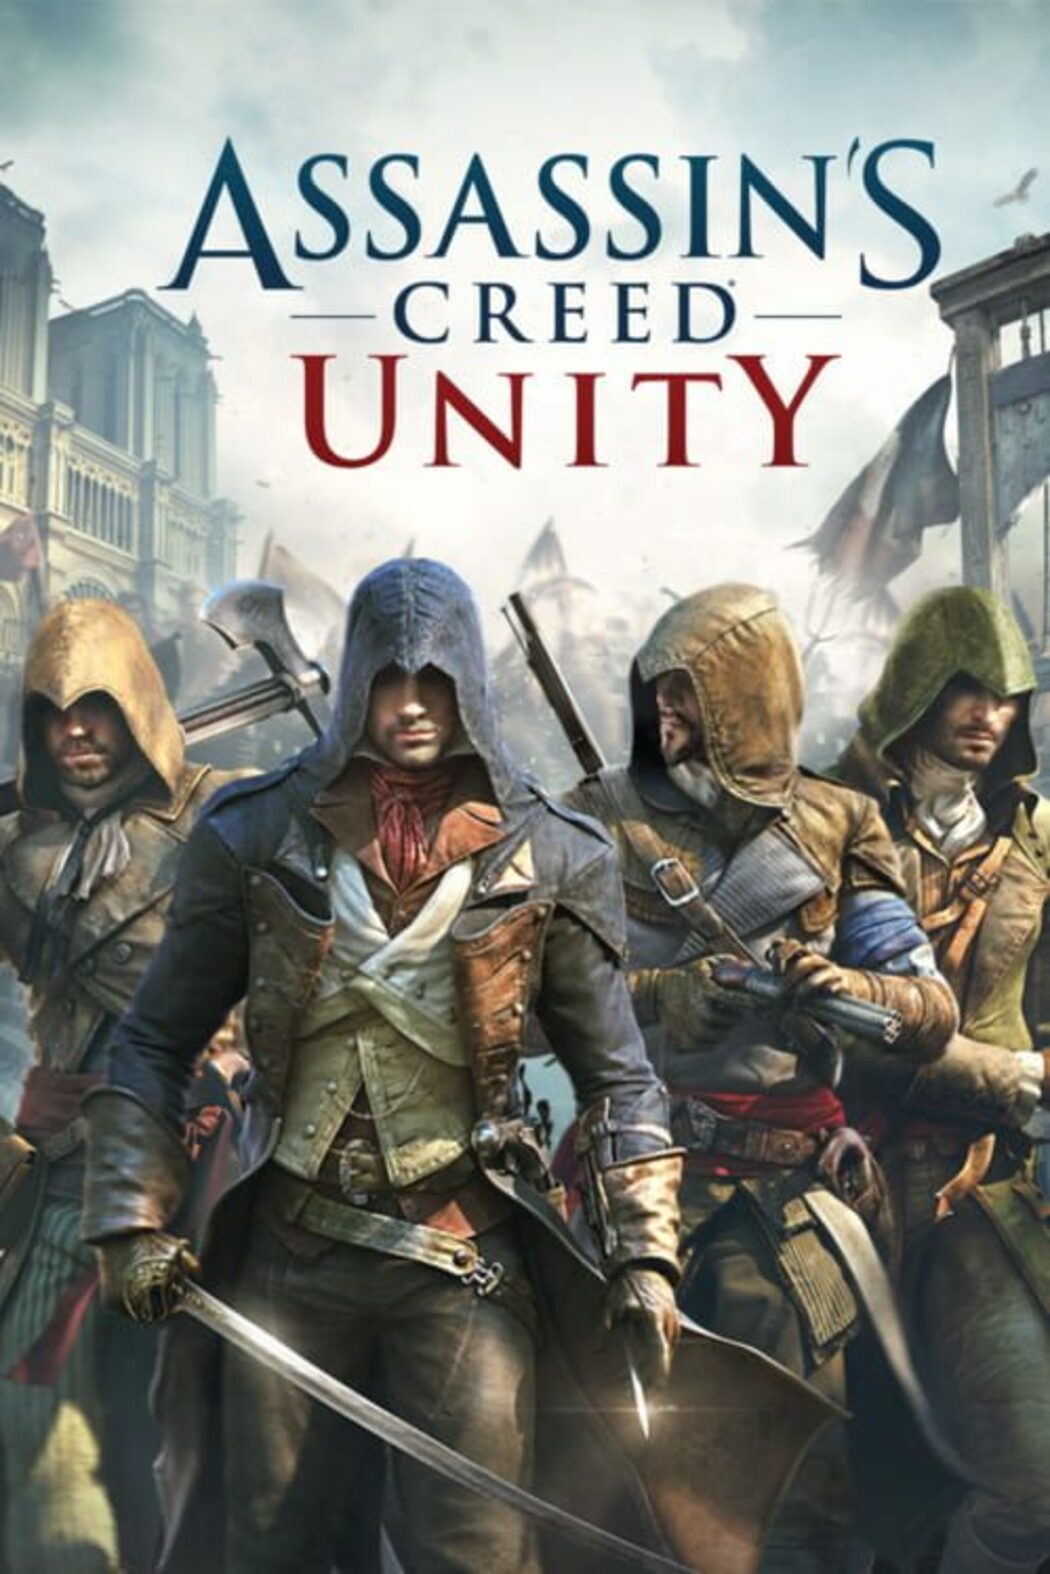 Assassin's Creed Unity for PC Game Uplay Key Region Free